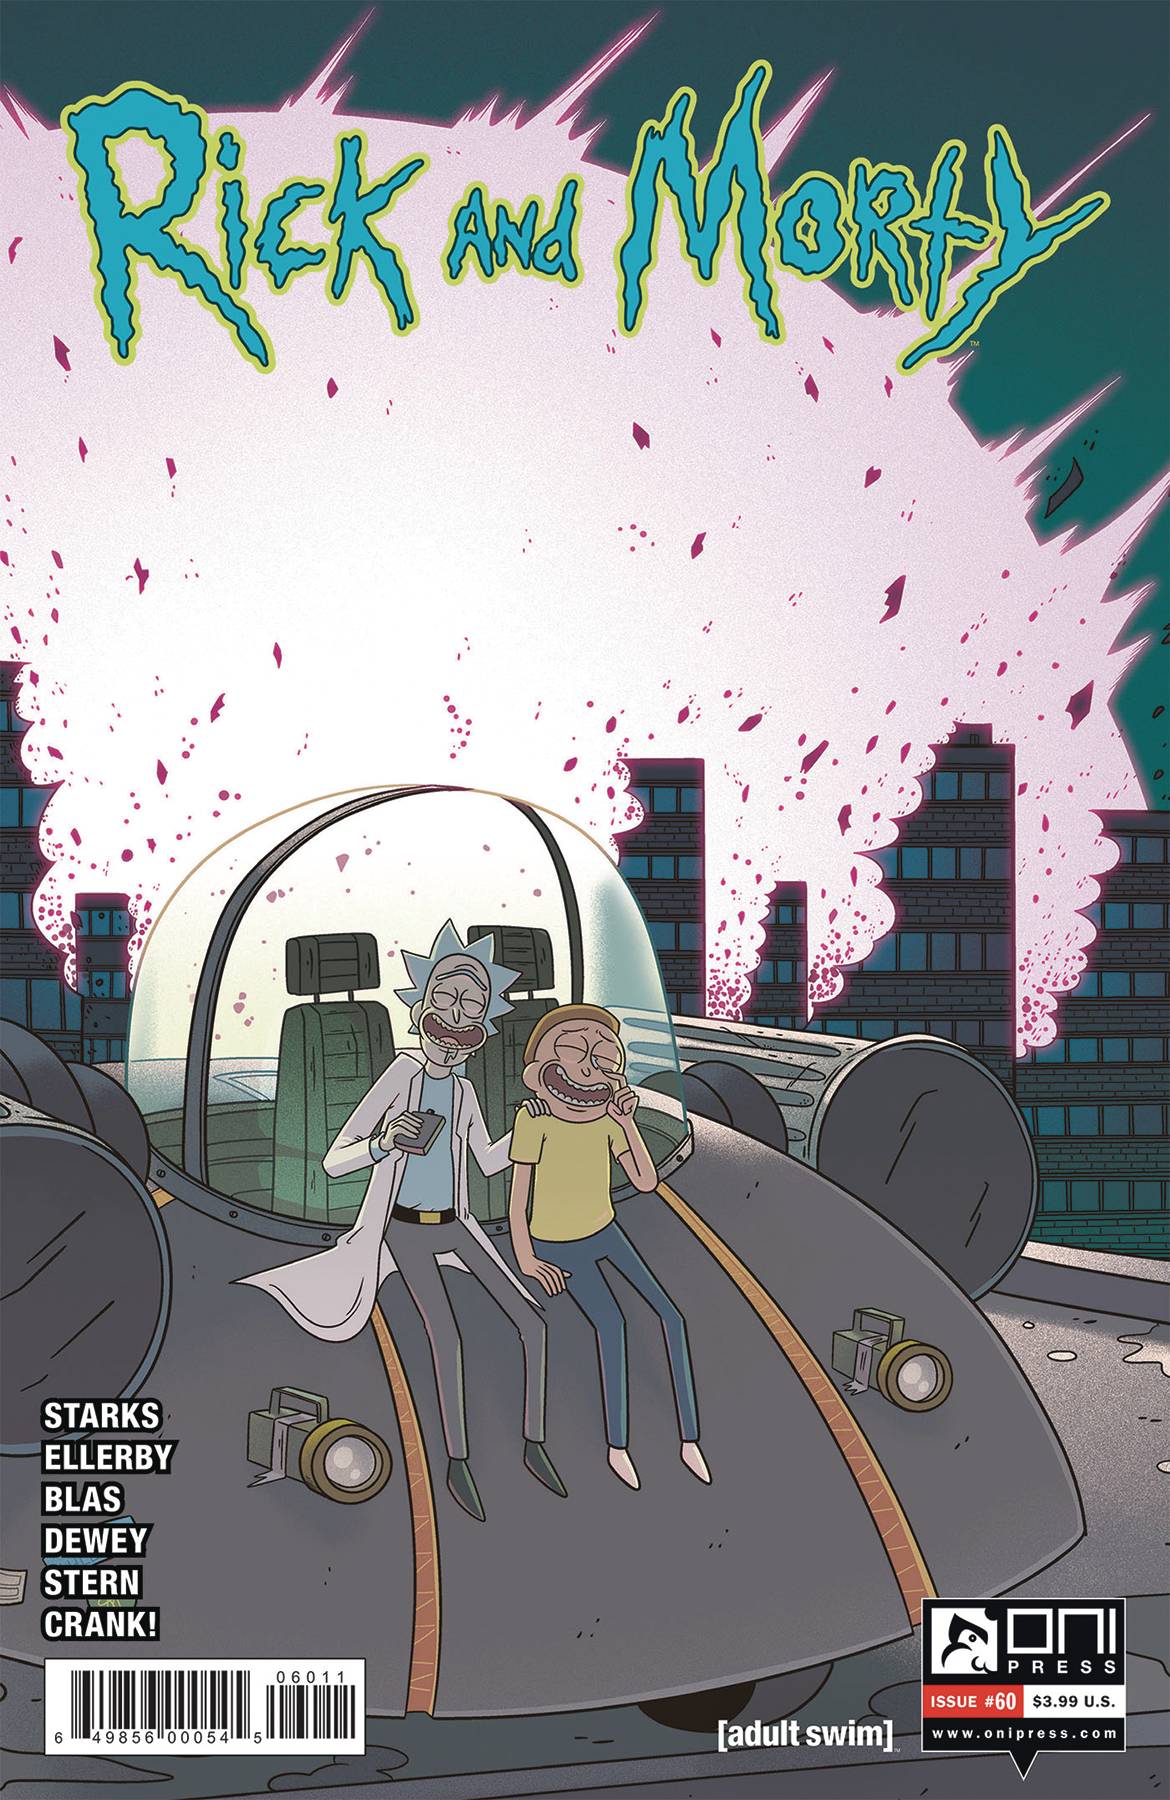 Rick and Morty #60 Cover A Ellerby (2015)